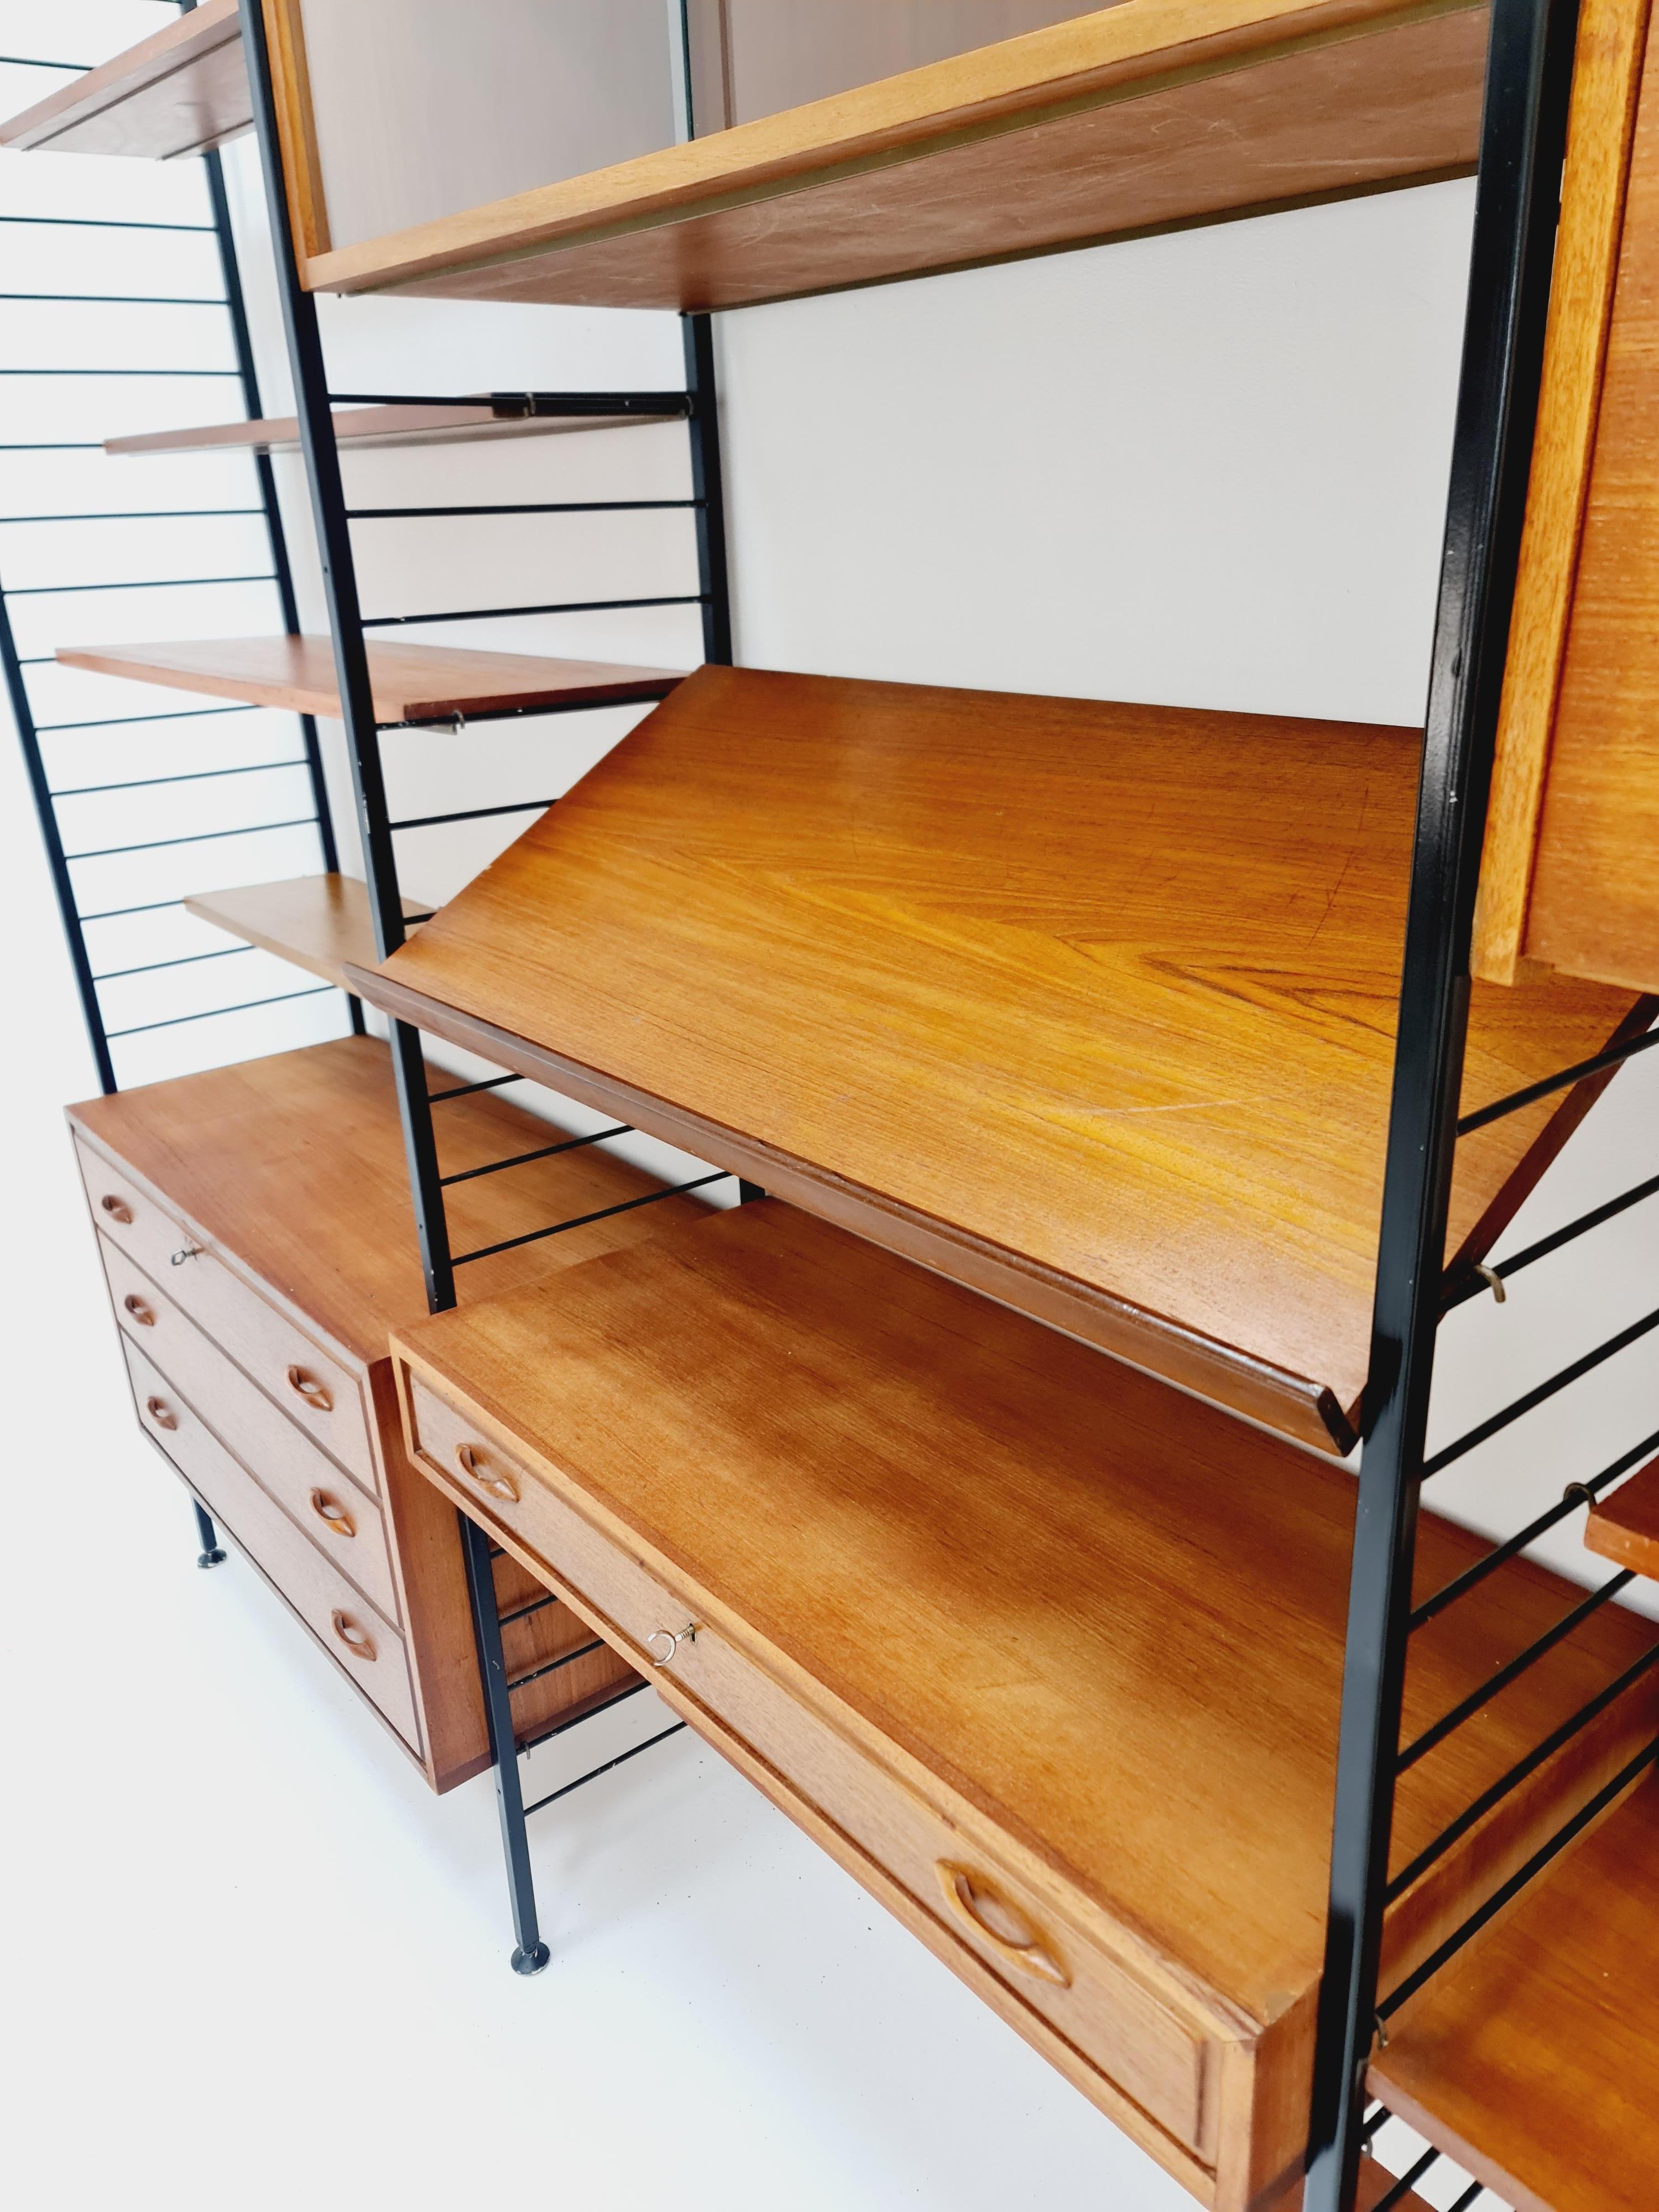 Metal Free standing Mid century modular unit shelving system by Staples Ladderax